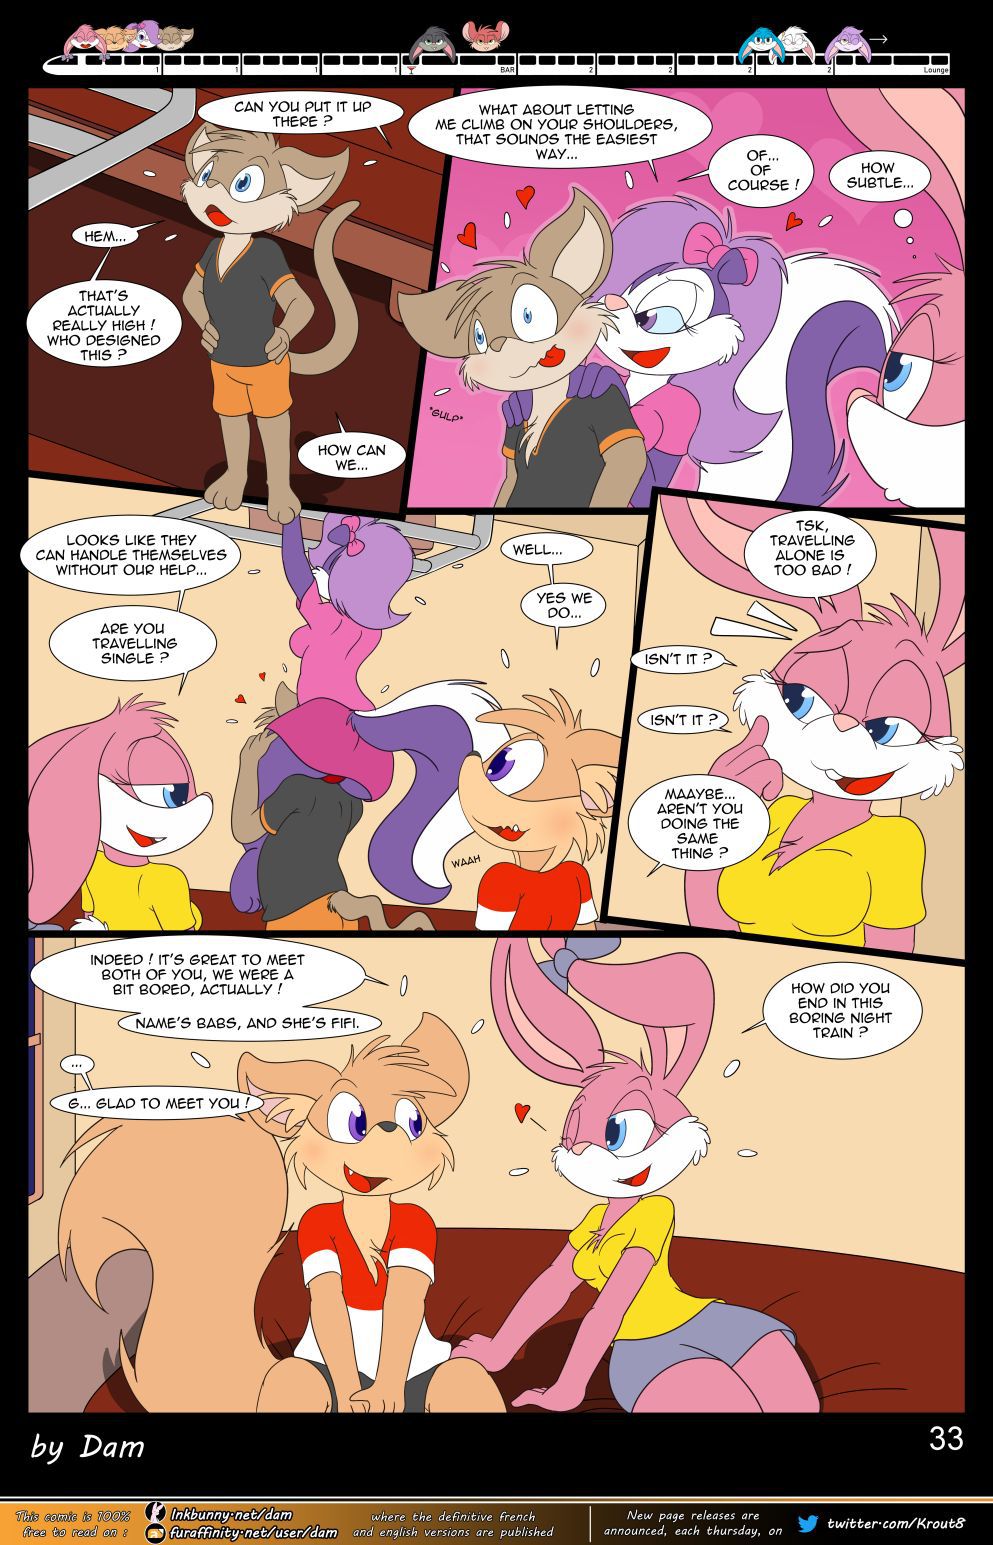 [Dam] Toons on a train [Ongoing] 33